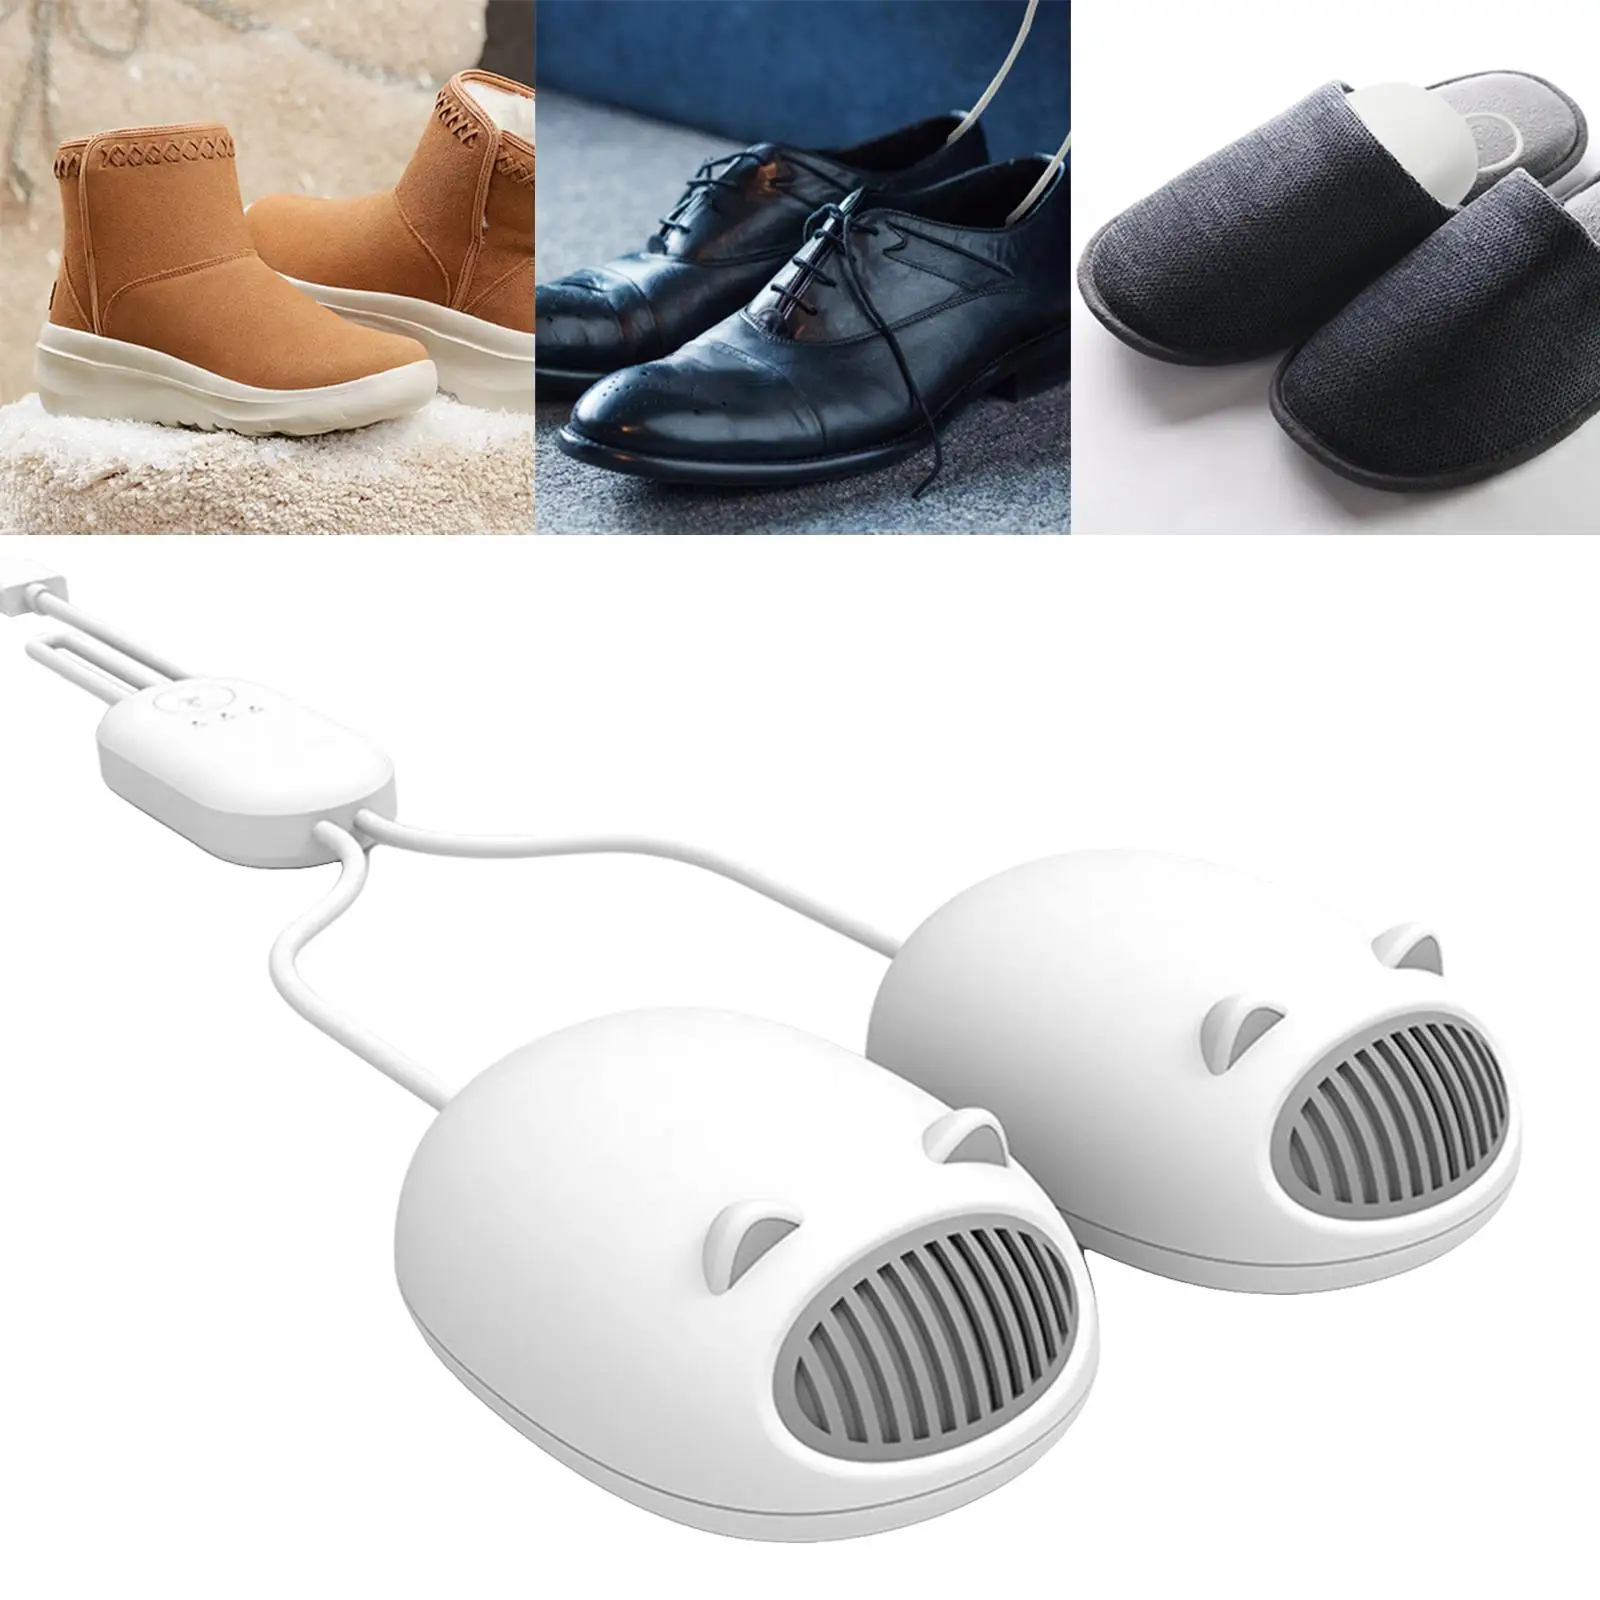 Portable Electric Shoe Dryer Machine Fast Dryer Odor Removal No Noise Household Length Adjustable Mini Socks Gloves Hats Shoes